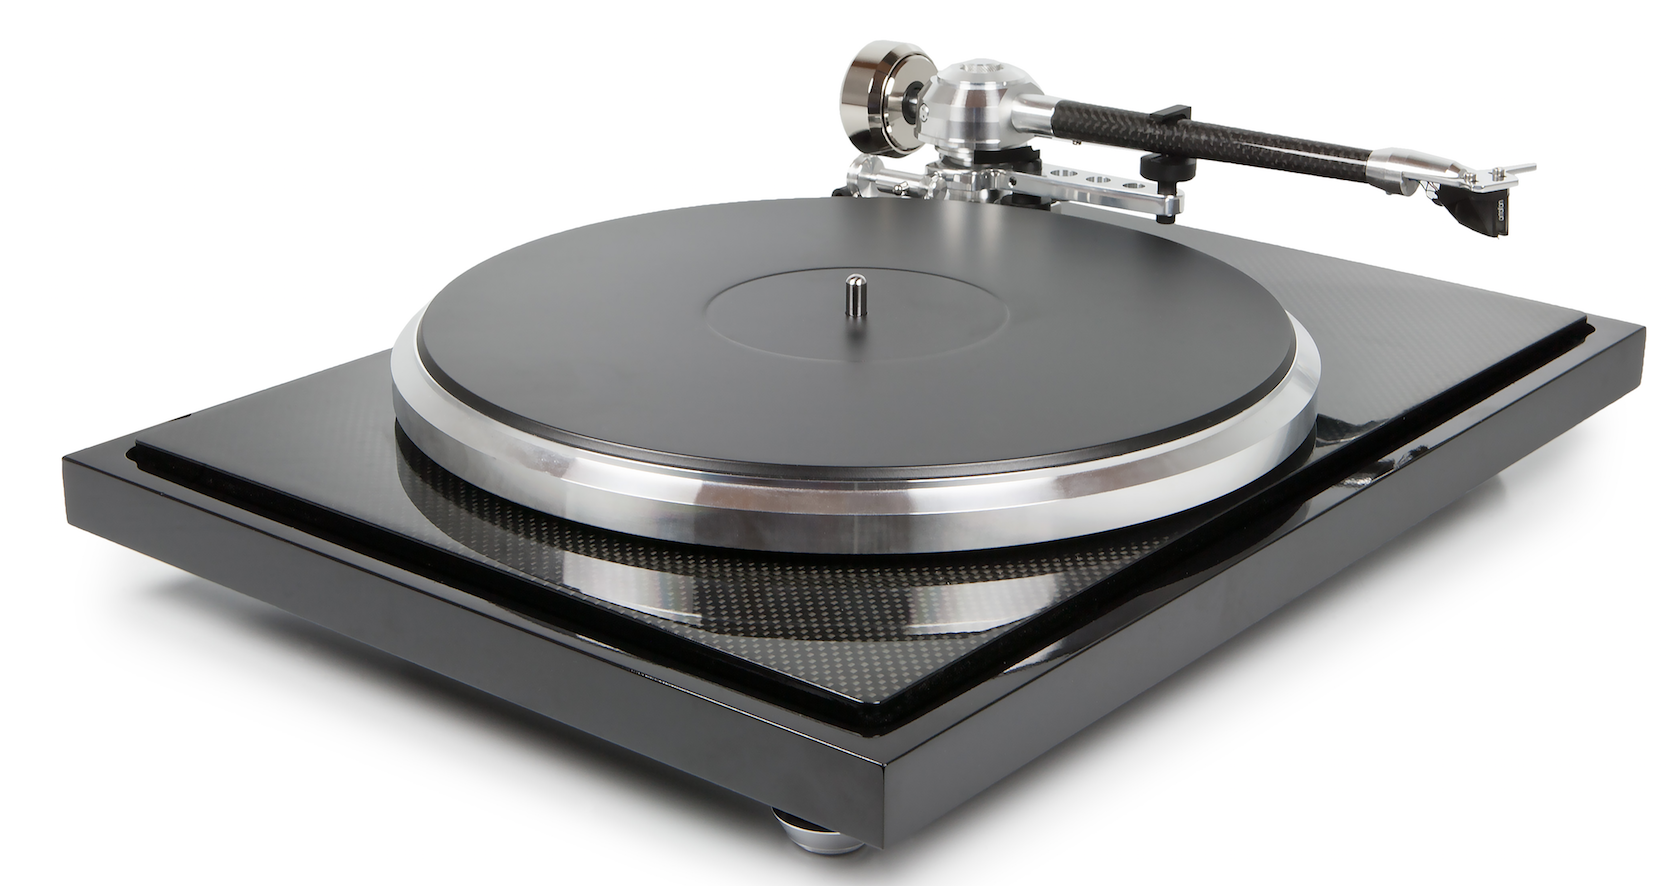 C-Major Turntable Super Pack From EAT